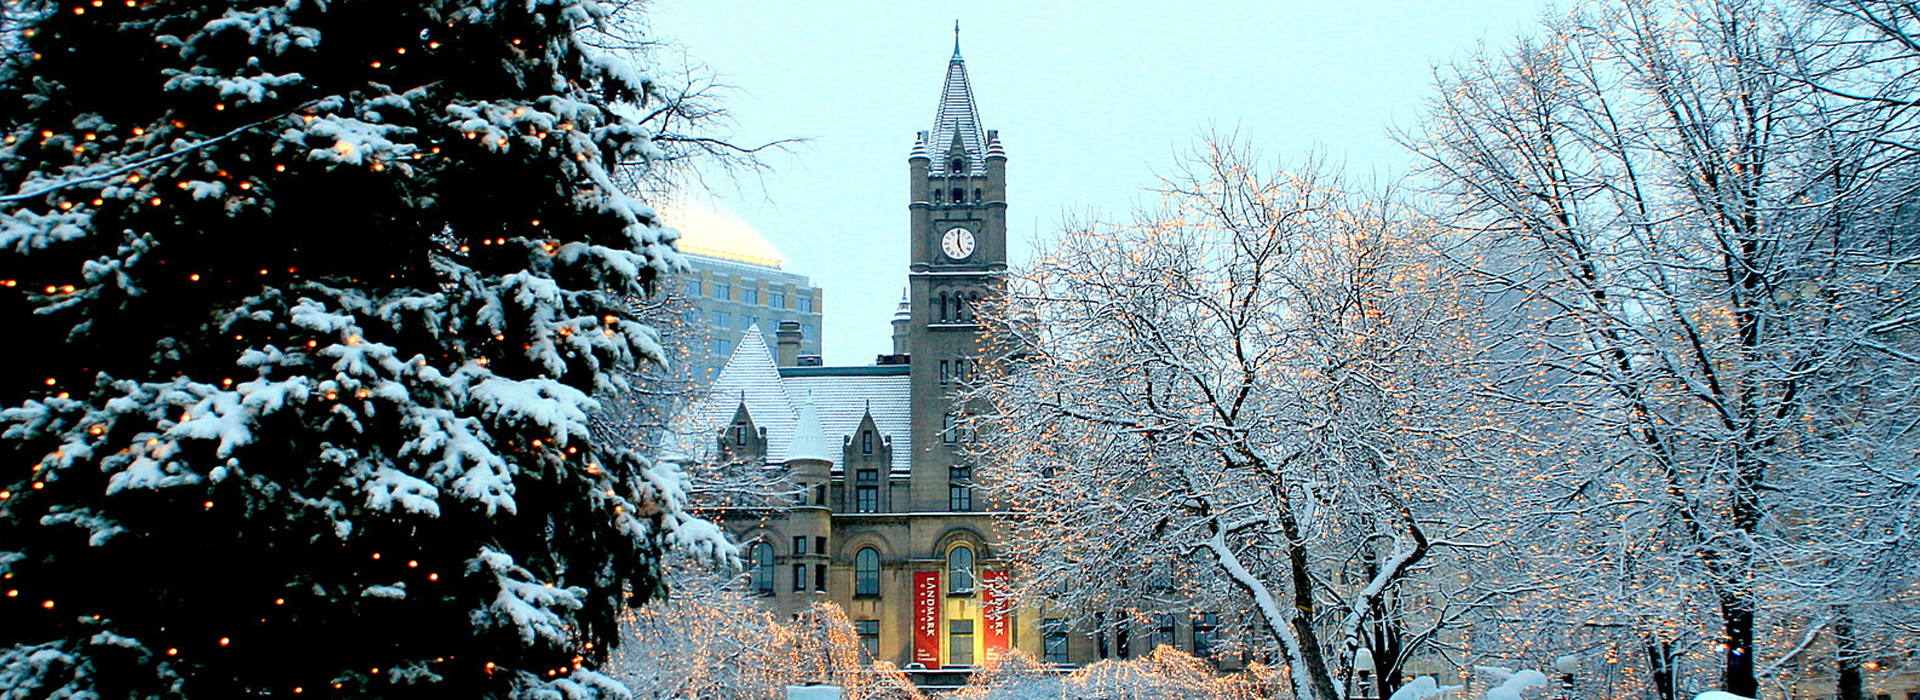 Cathedral of Saint Paul Heritage Foundation – St. Paul, MN